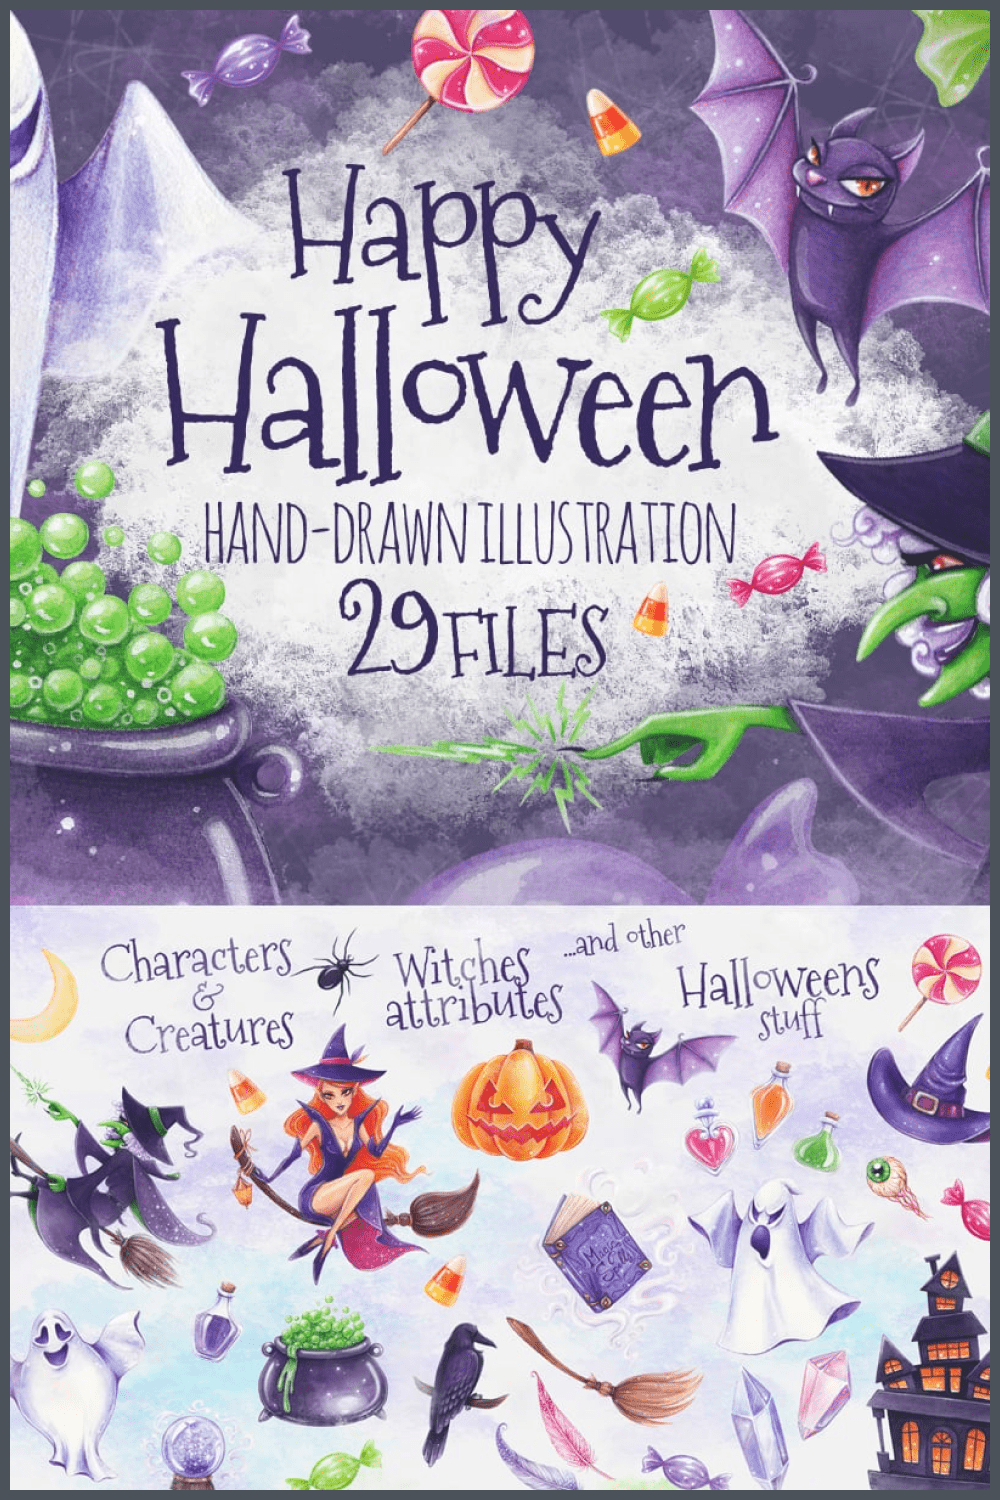 This is a magical set of illustrations for celebrating Halloween.